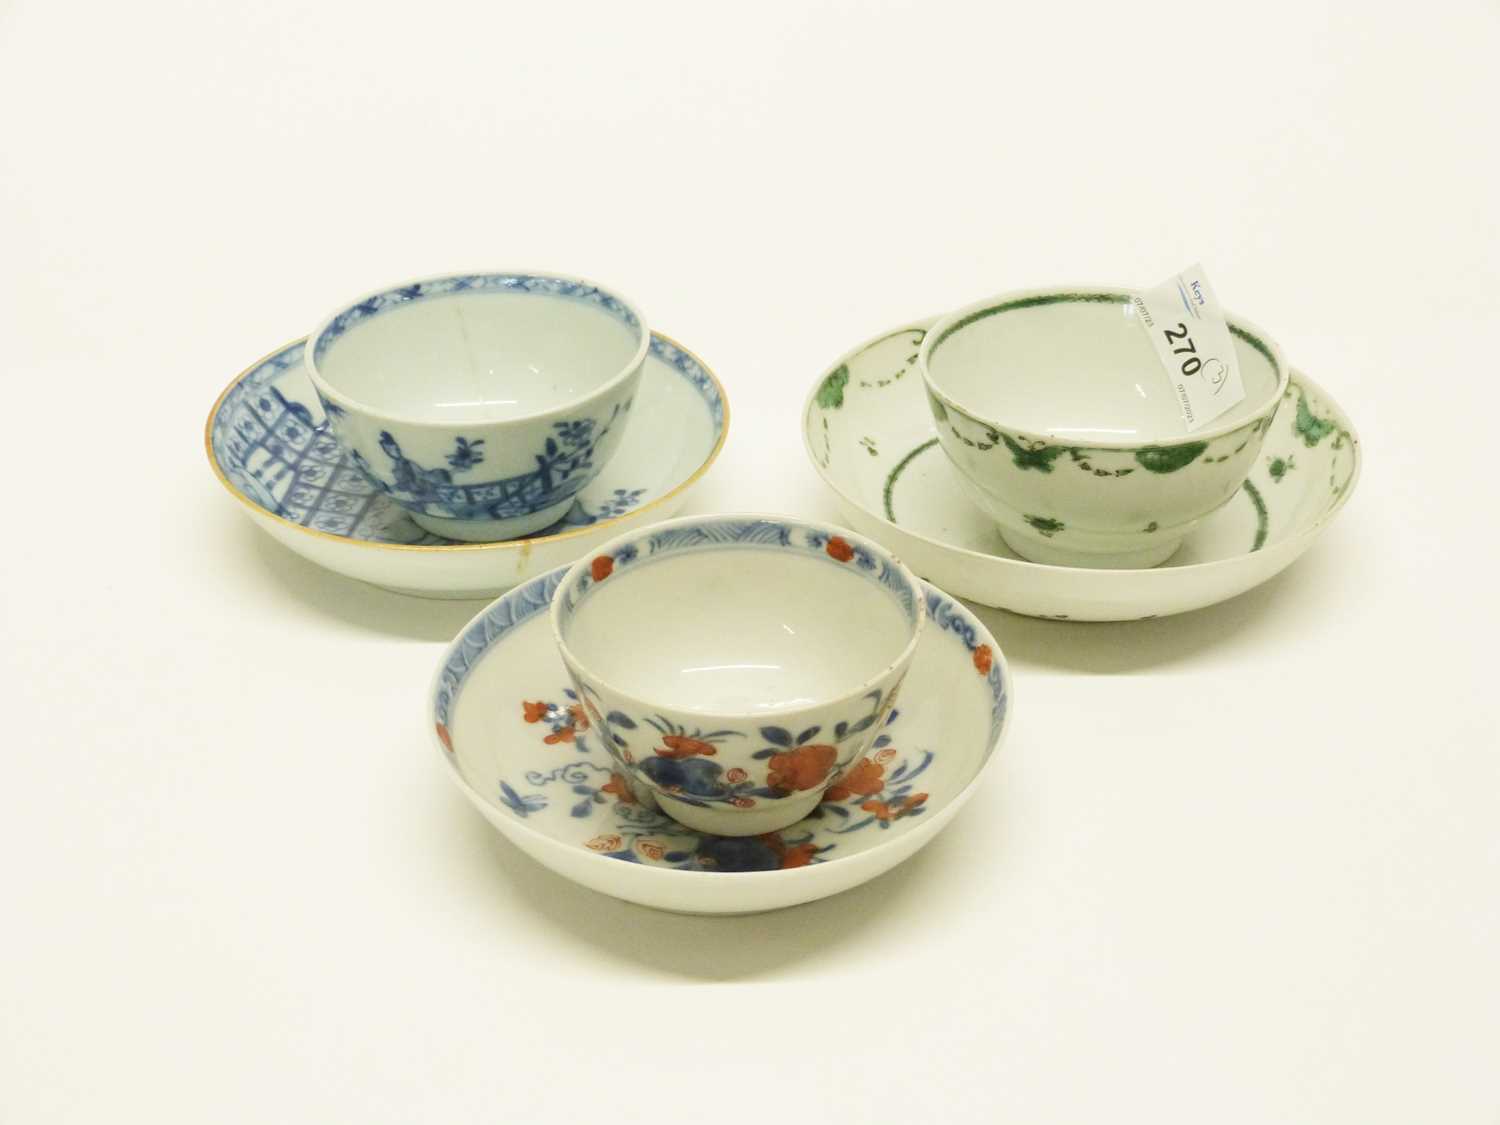 A group of three 18th Century Chinese export Chinese tea bowls and saucers including a Famille Verte